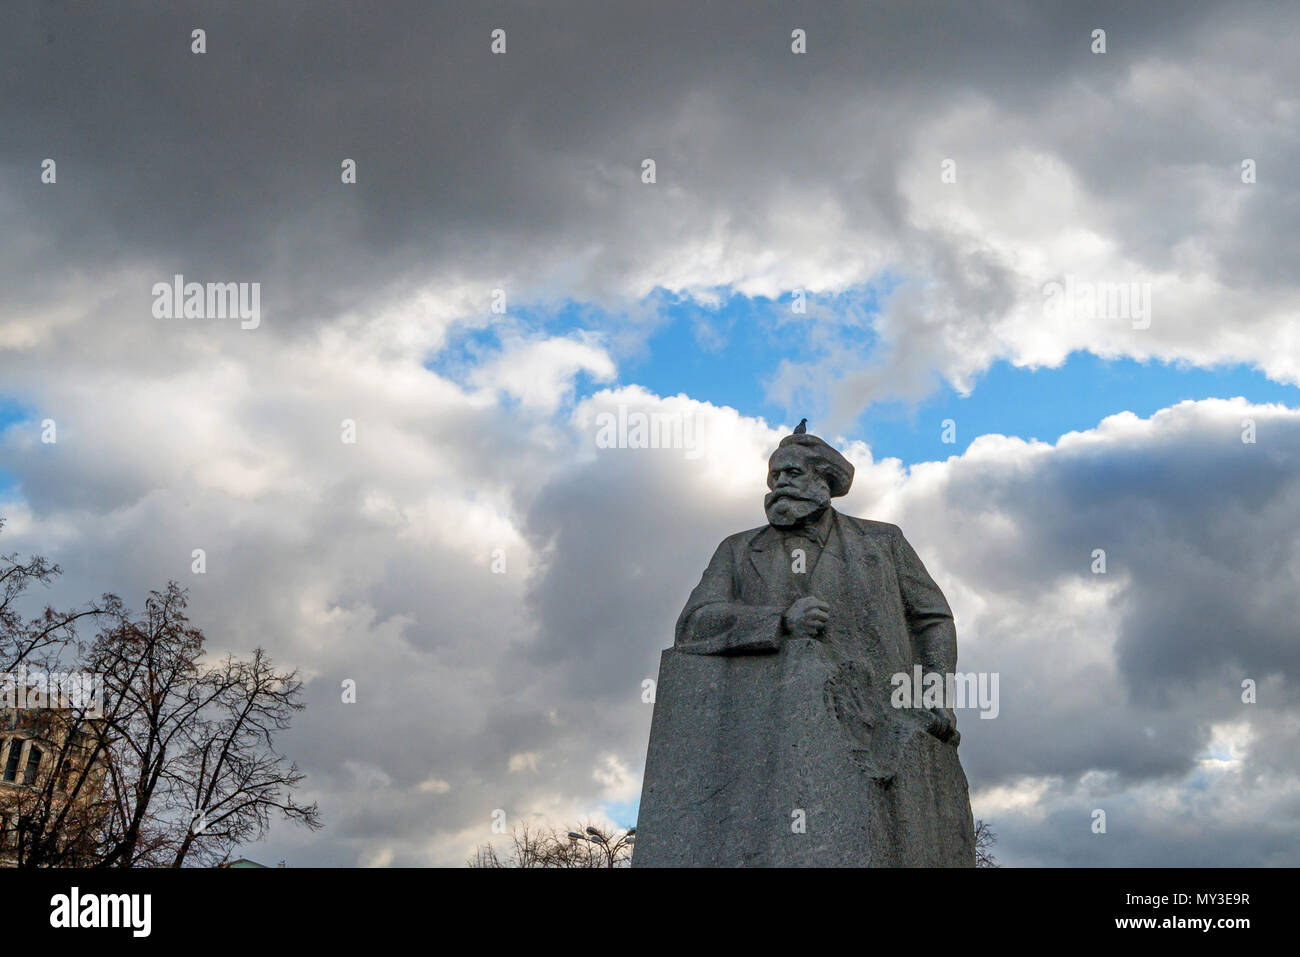 MOSCOW - NOVEMBER 2, 2014: Karl Marx statue in Moscow against cloudy sky Stock Photo